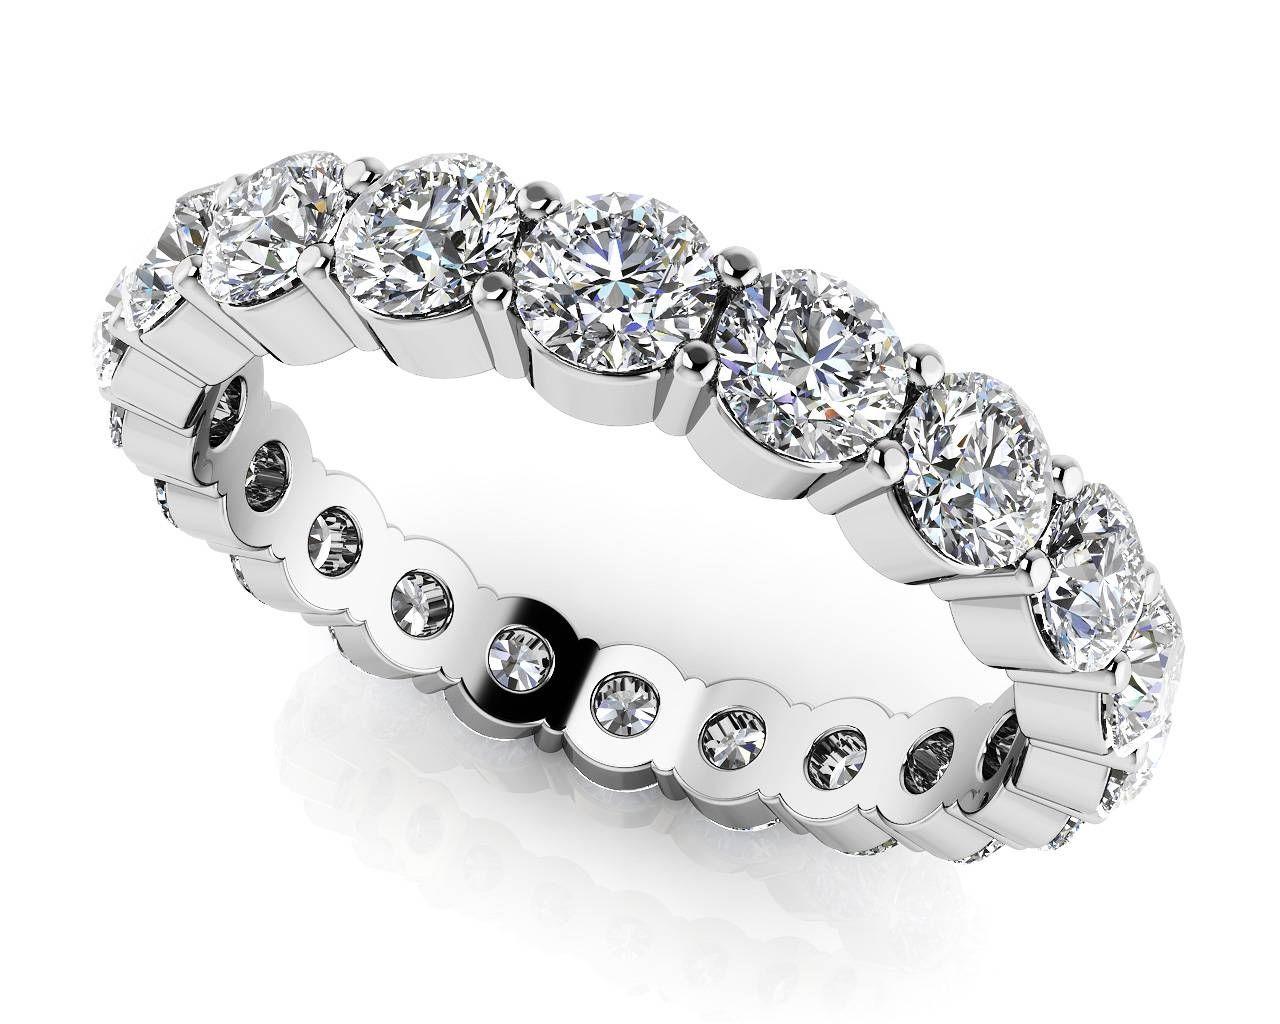 Large Collection Of Quality Diamond Eternity Rings & Bands Pertaining To 2017 3 Carat Anniversary Rings (View 20 of 25)